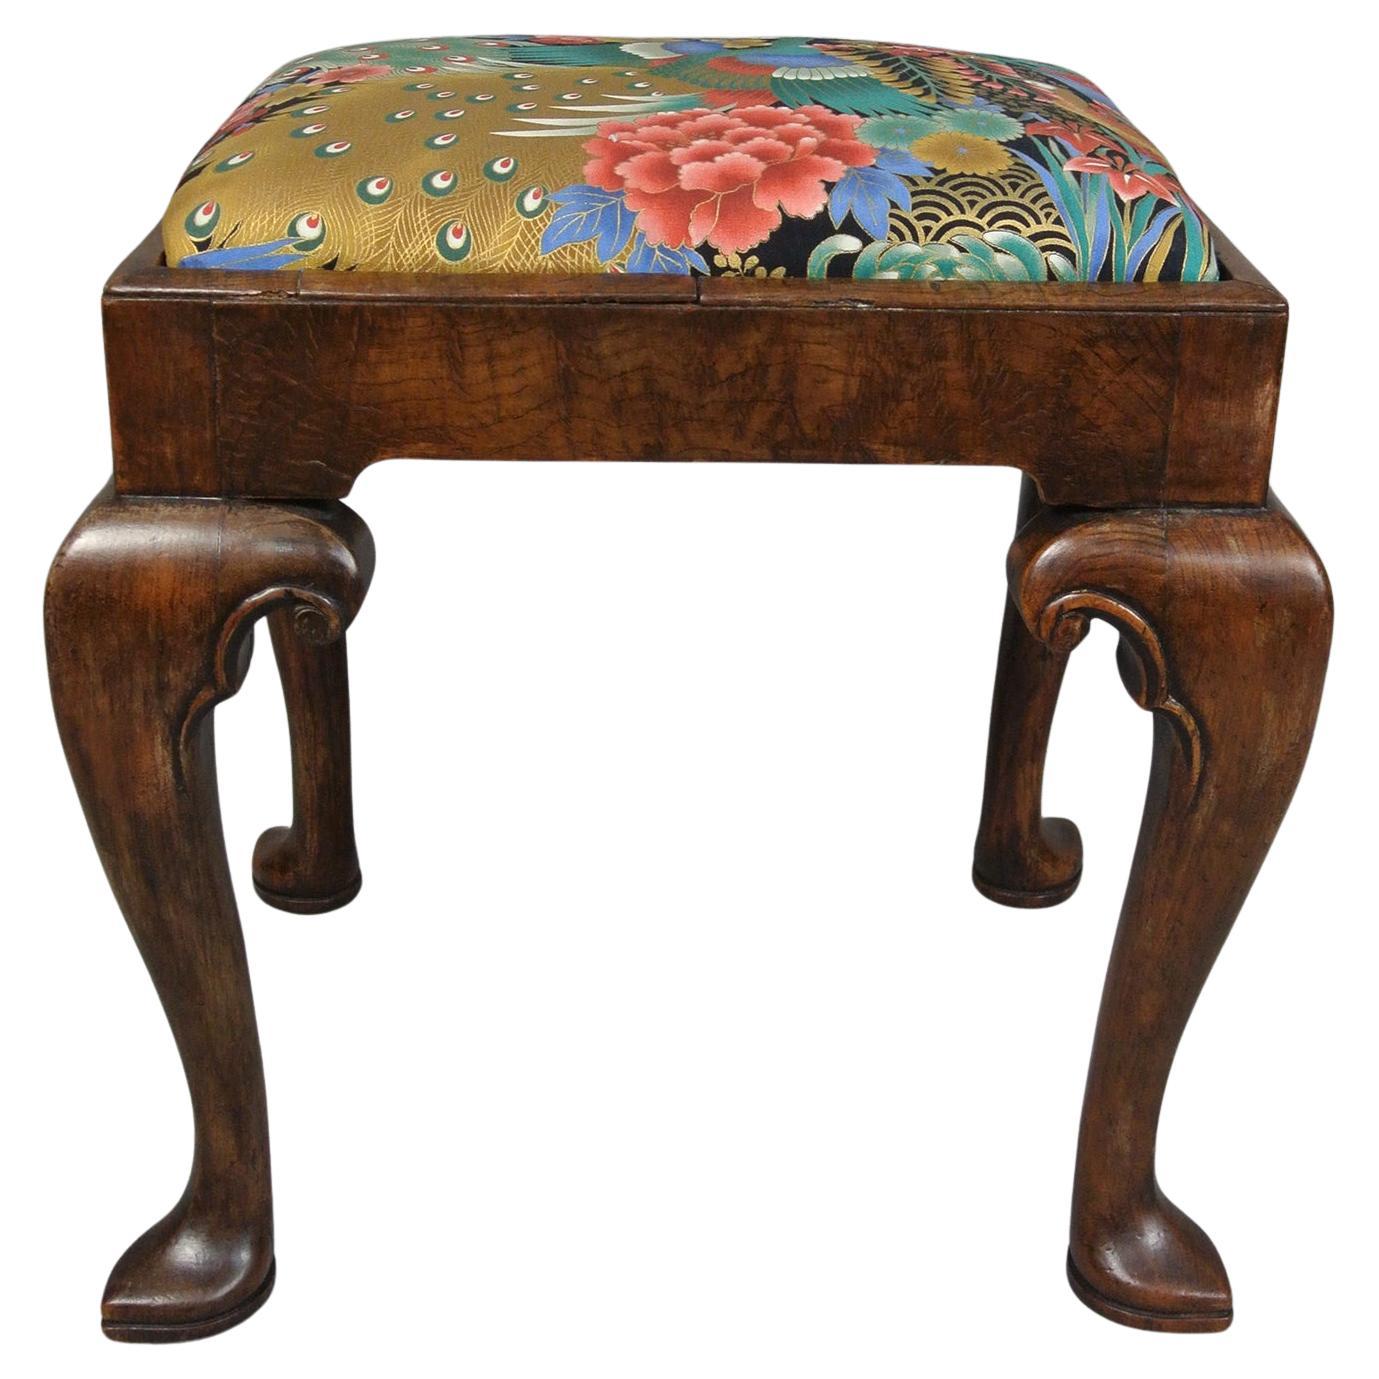 Tall and Handsome George II Walnut Stool with Slipper Feet c. 1750 For Sale